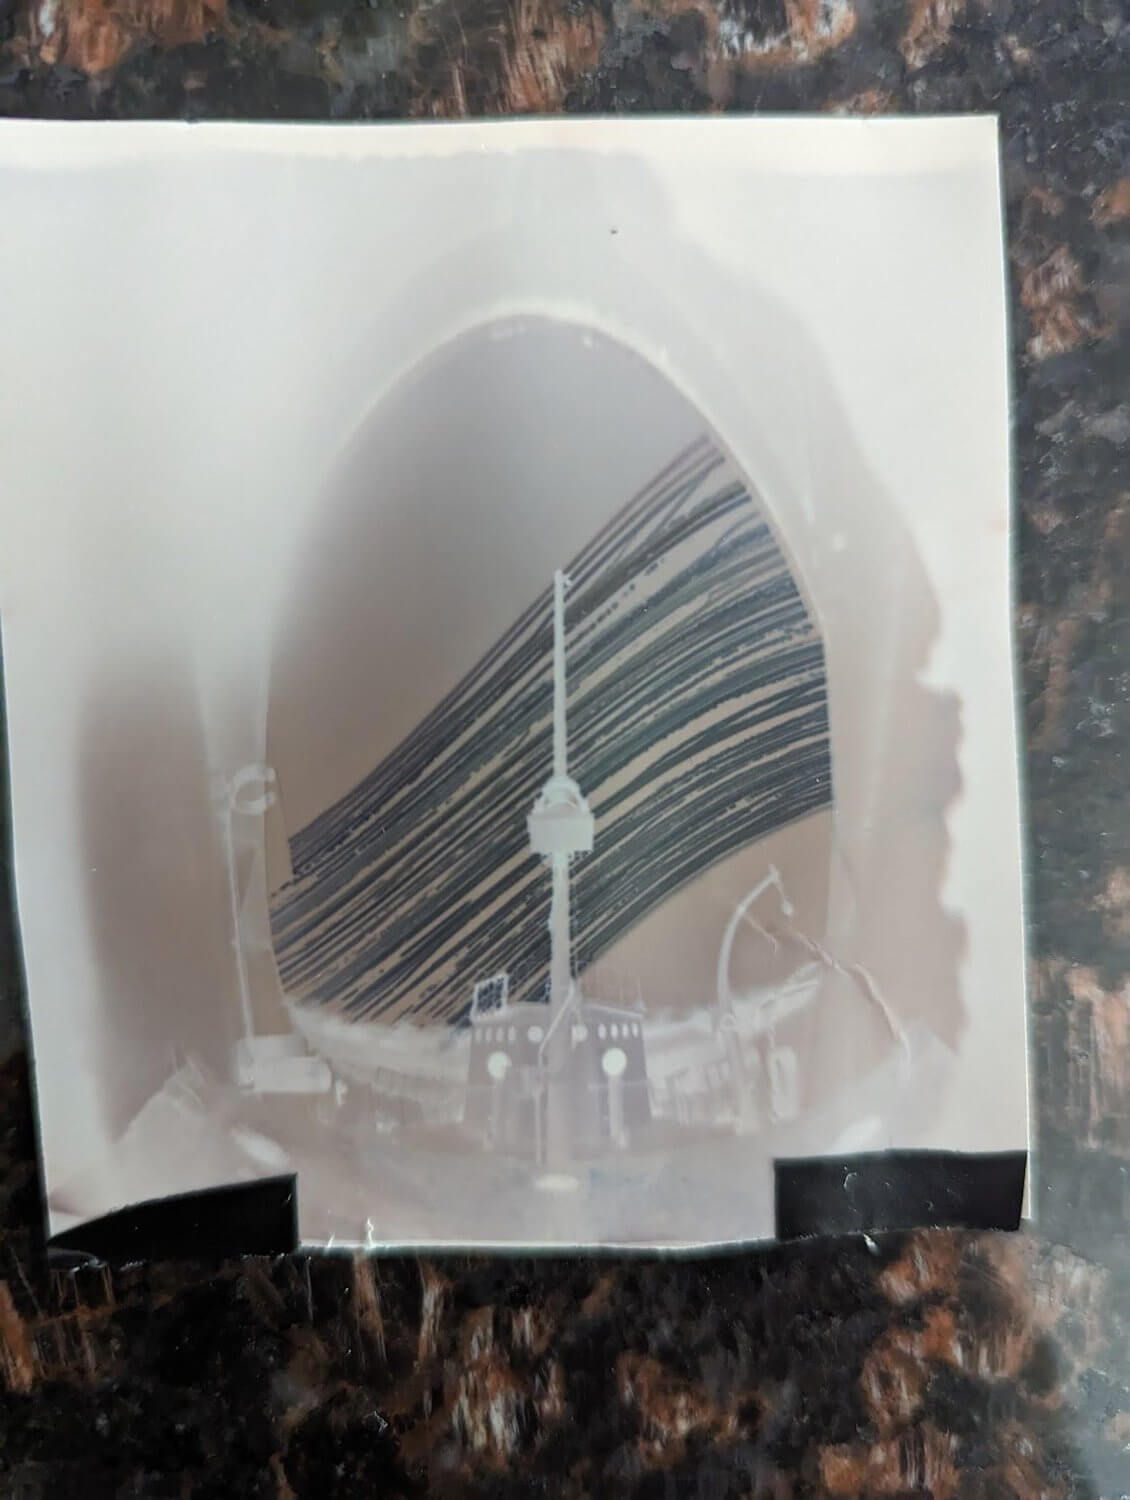 The solargraph paper directly out of the container.